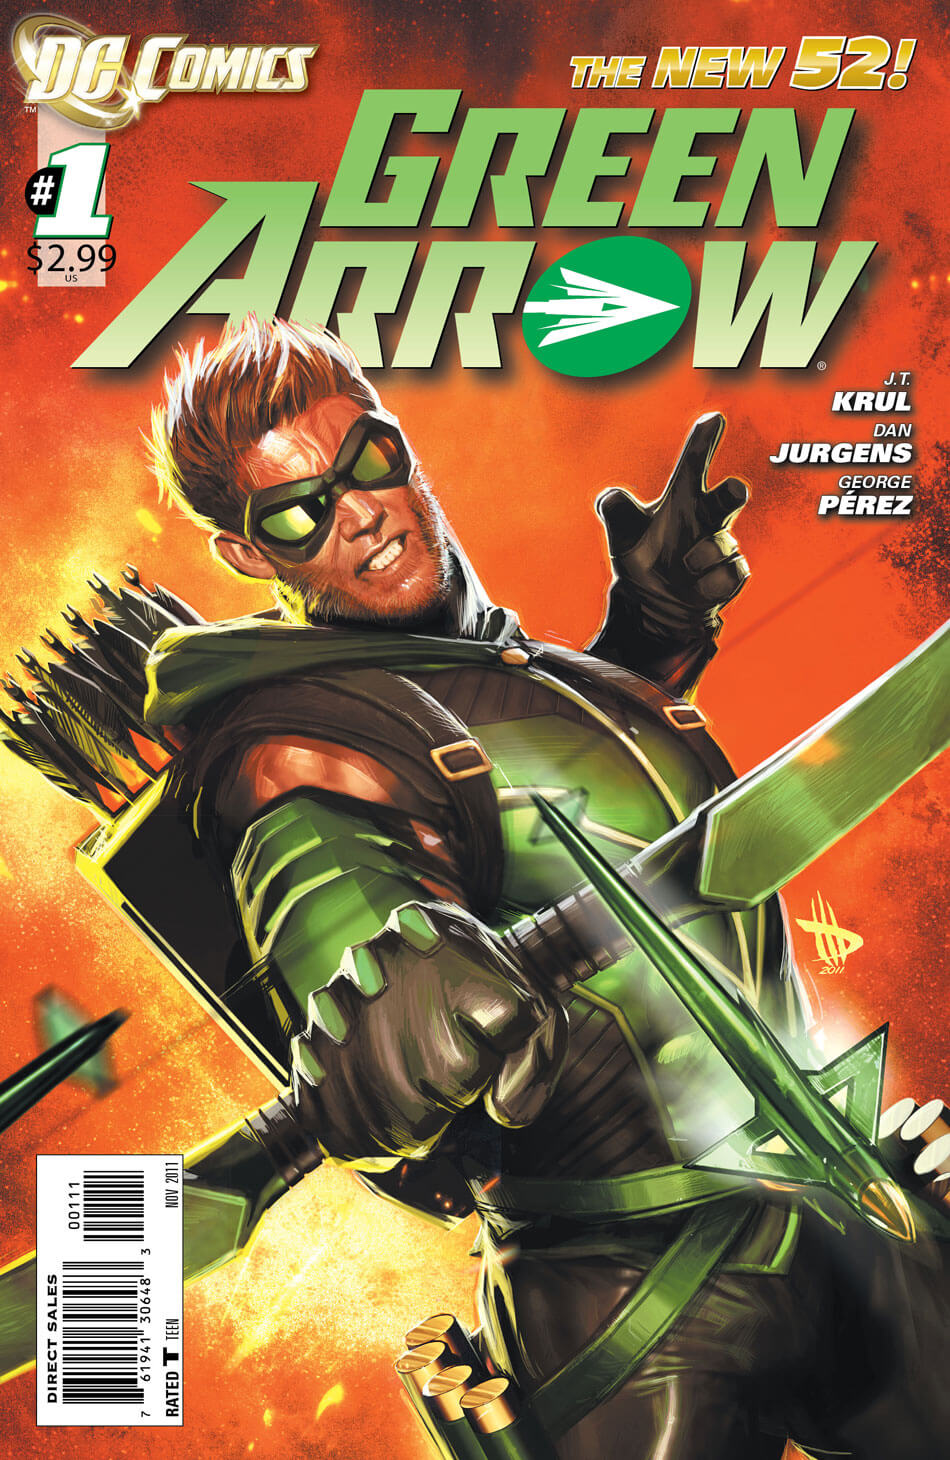 Green-Arrow-#1-cover-by-Dave-Wilkins